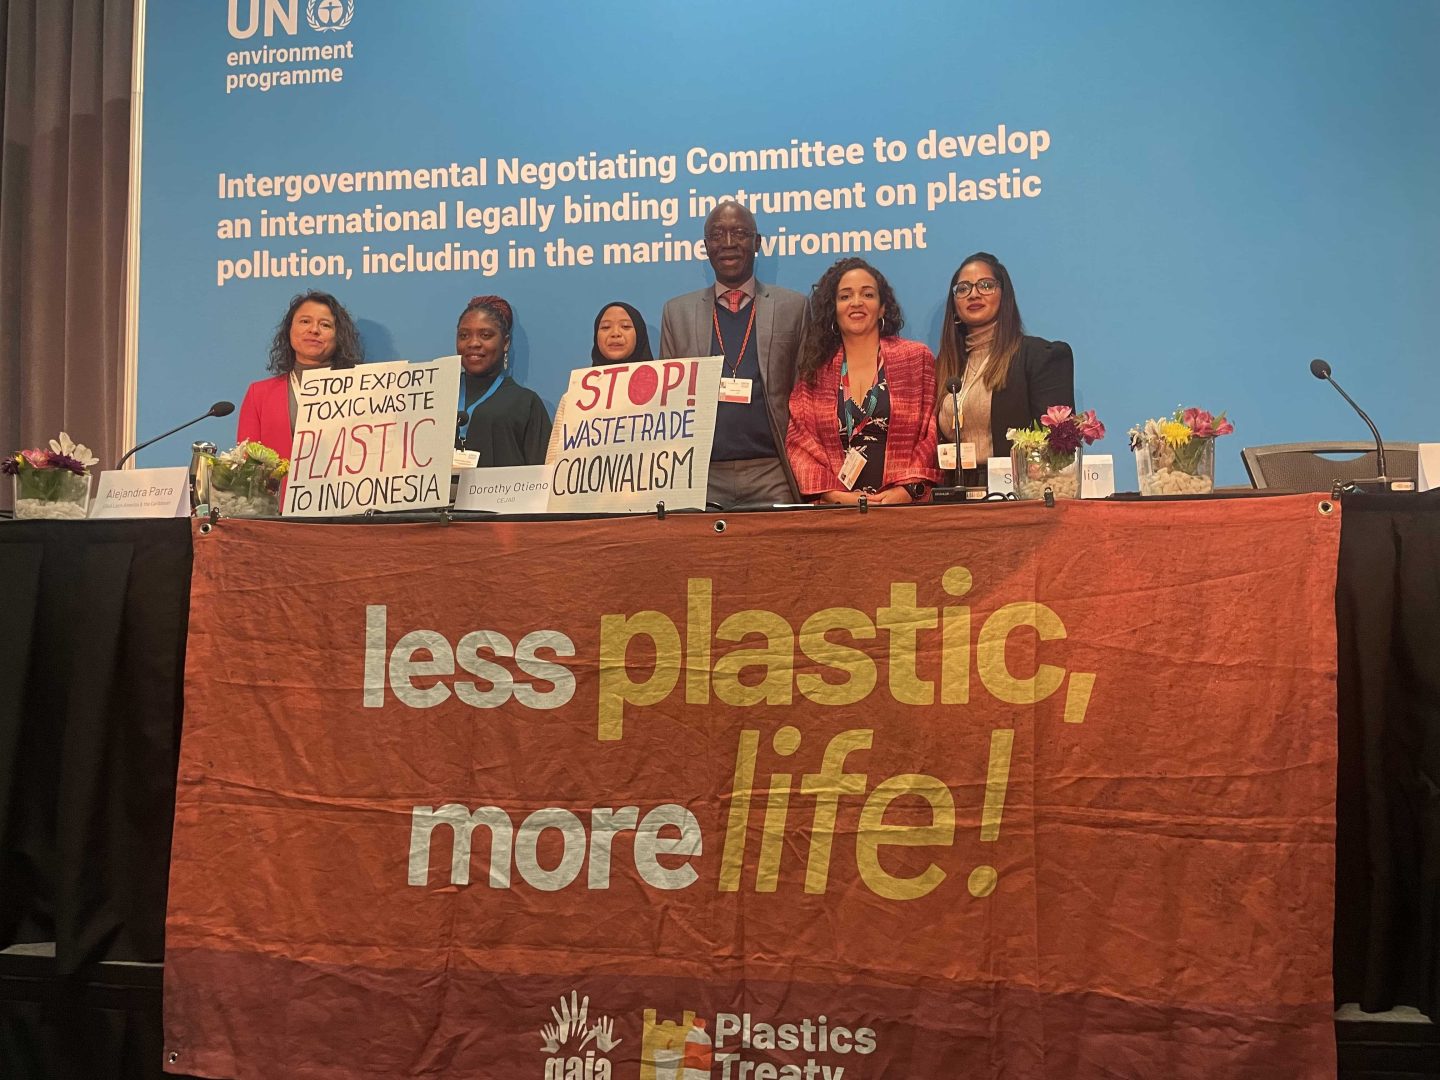 Global South leaders pose for a photo after the press briefing behind a streamer that says less plastic more life. They are also holding 2 placards that say stop waste trade, waste colonialism; and stop export toxic waste plastic to Indonesia